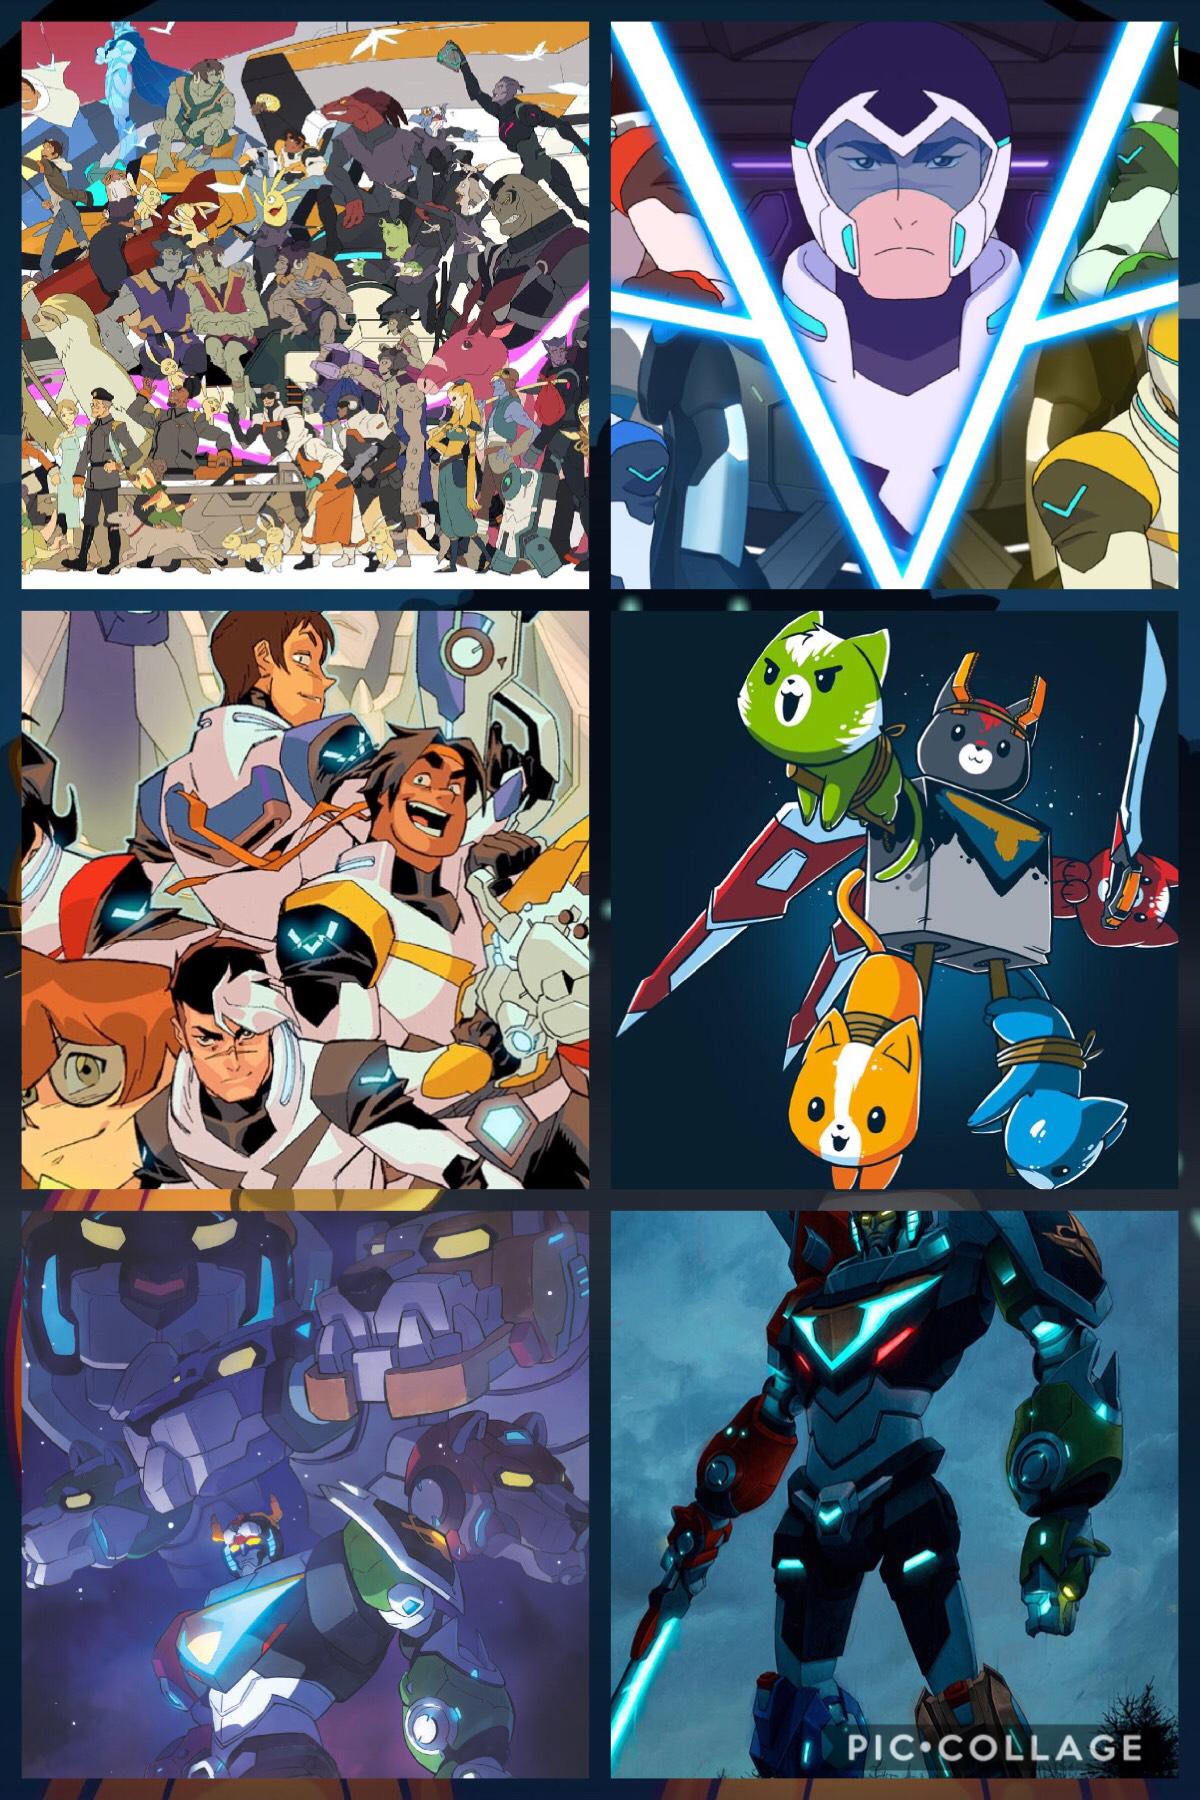 Voltron fans over here 😉